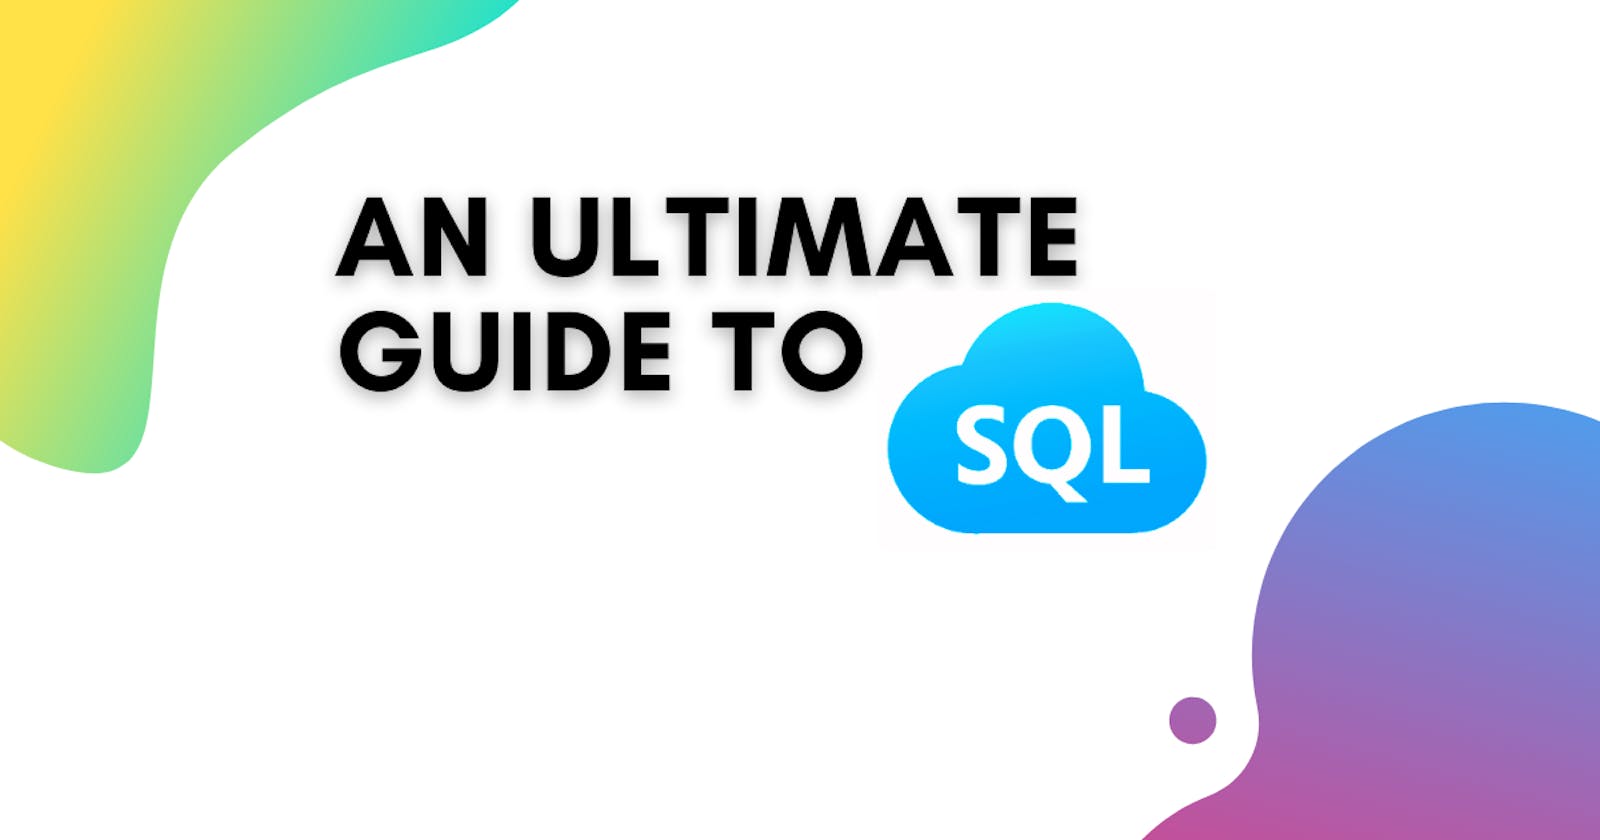 An Ultimate Guide to SQL